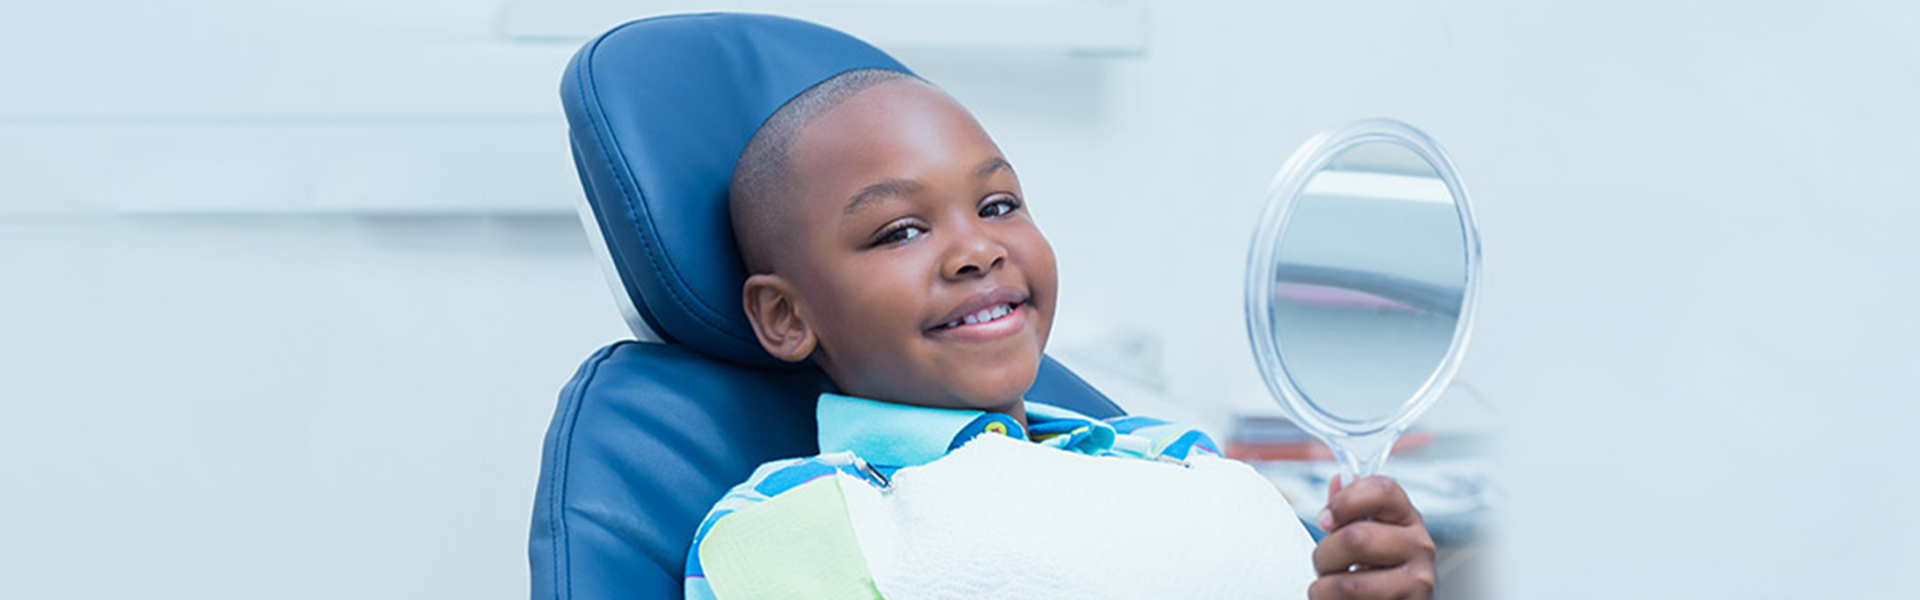 7 Types of Dental Practices Performed in Children Dentistry